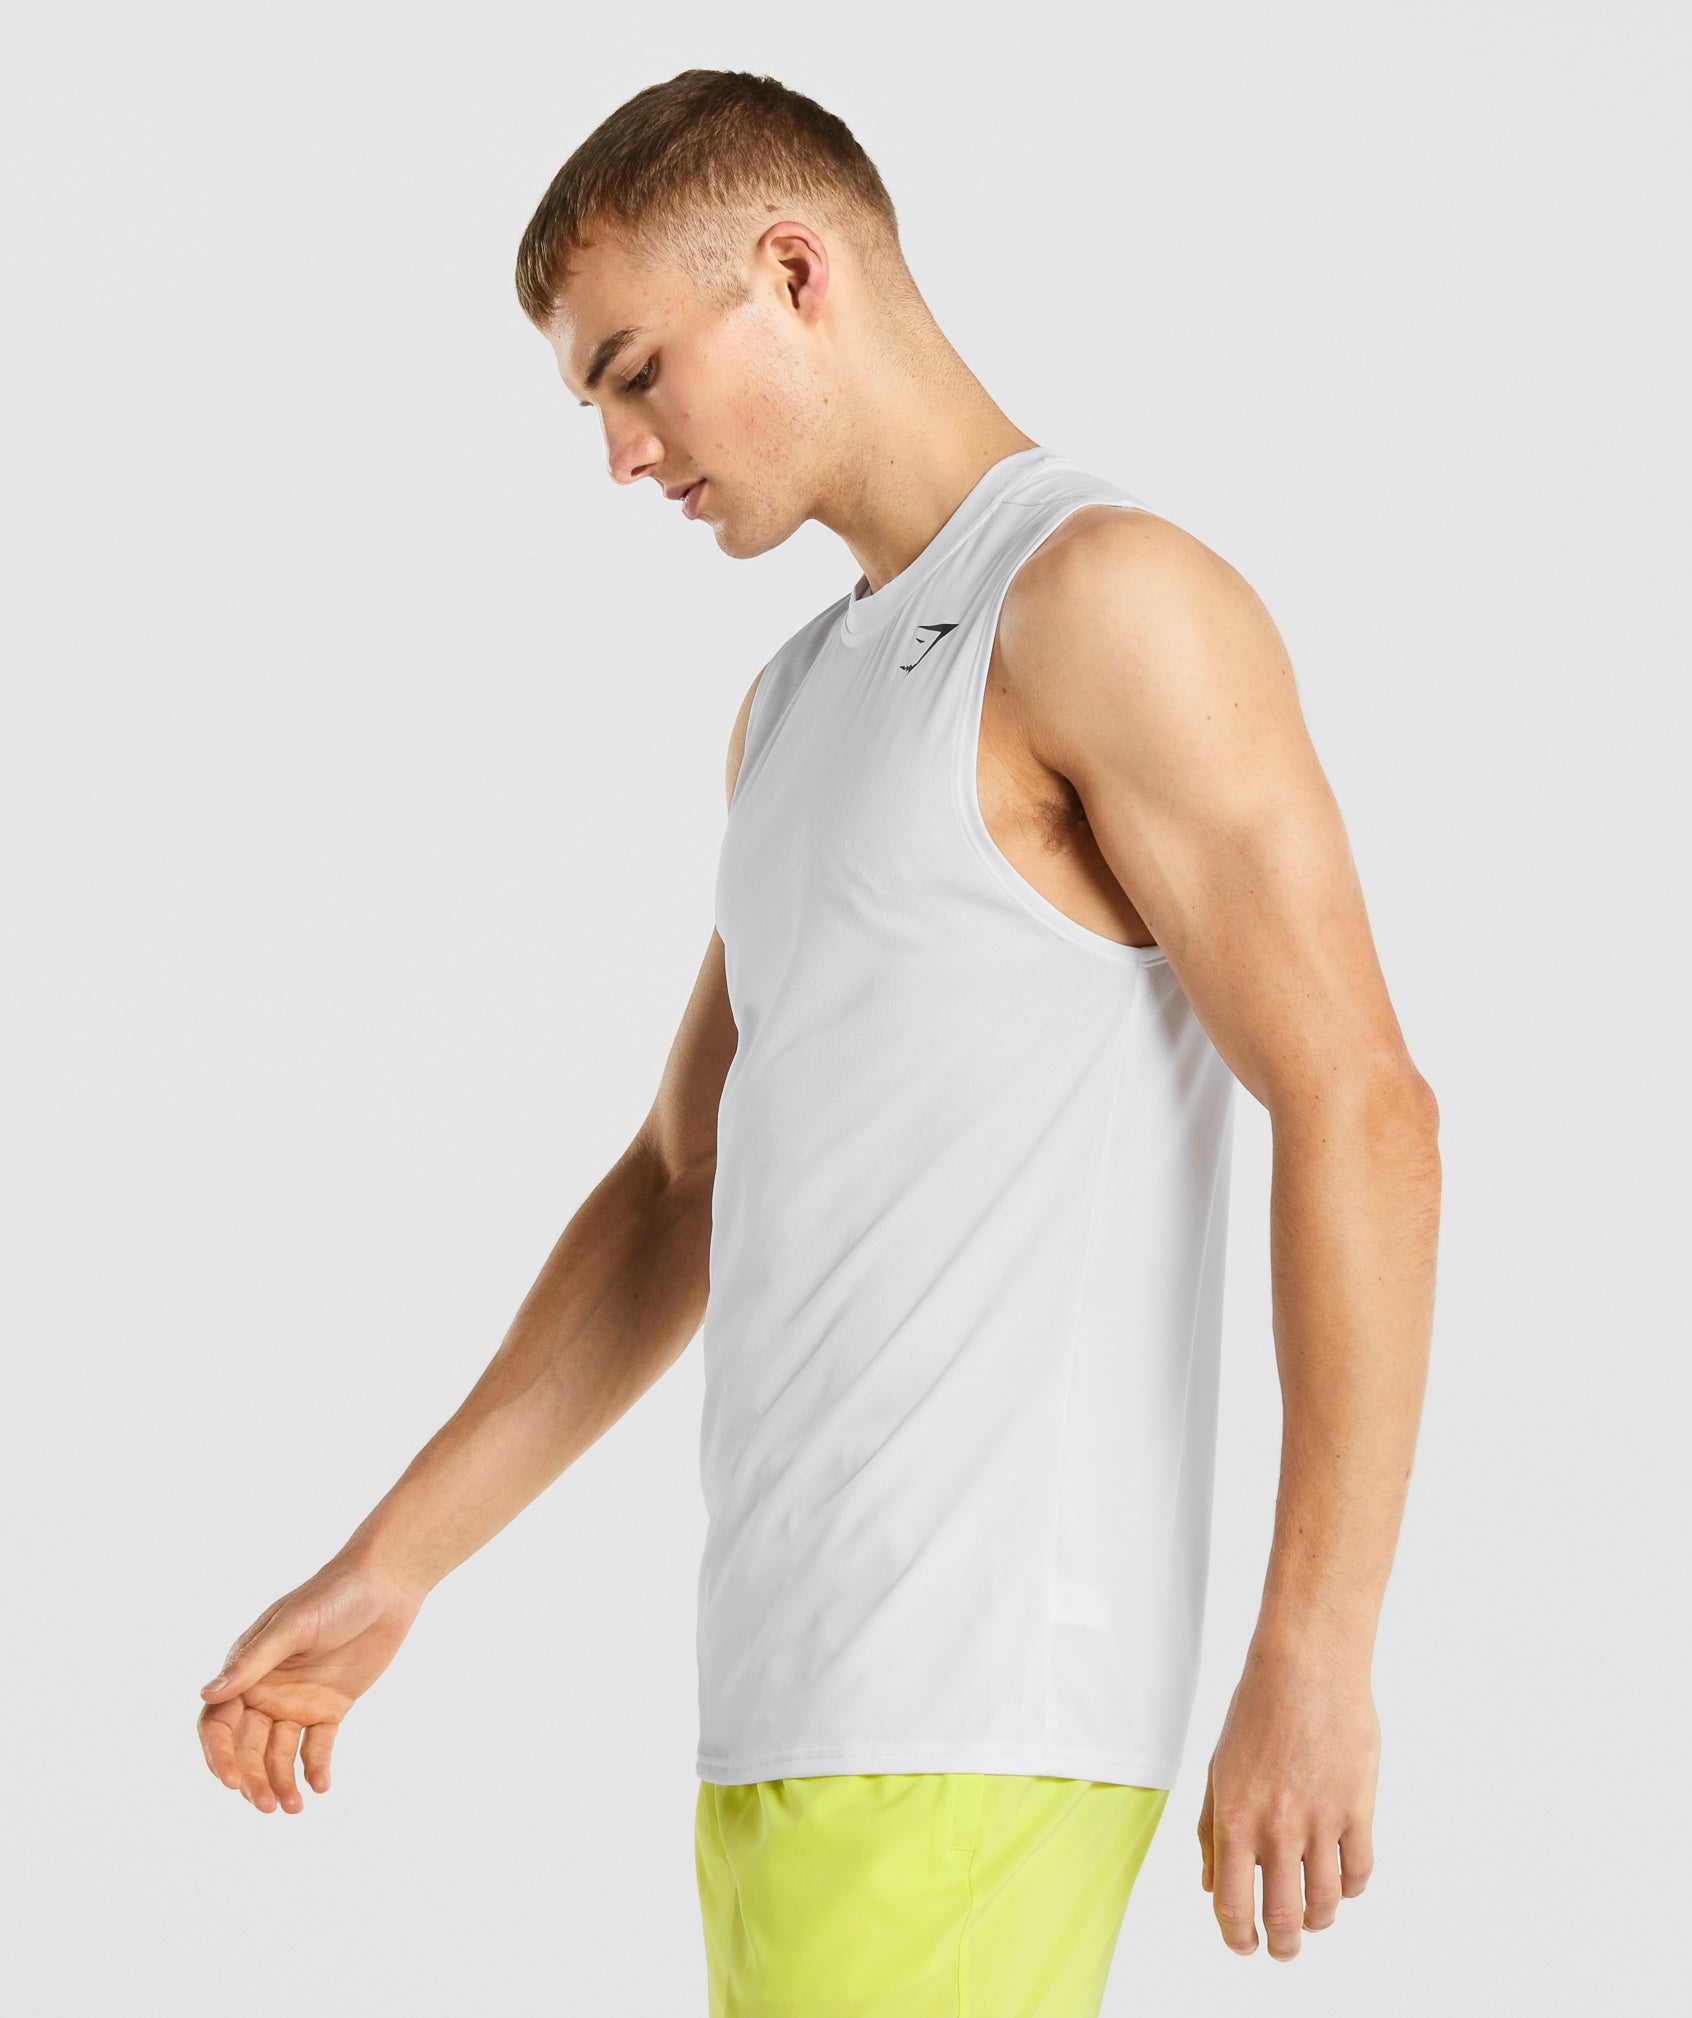 Arrival Sleeveless T-Shirt in White - view 3